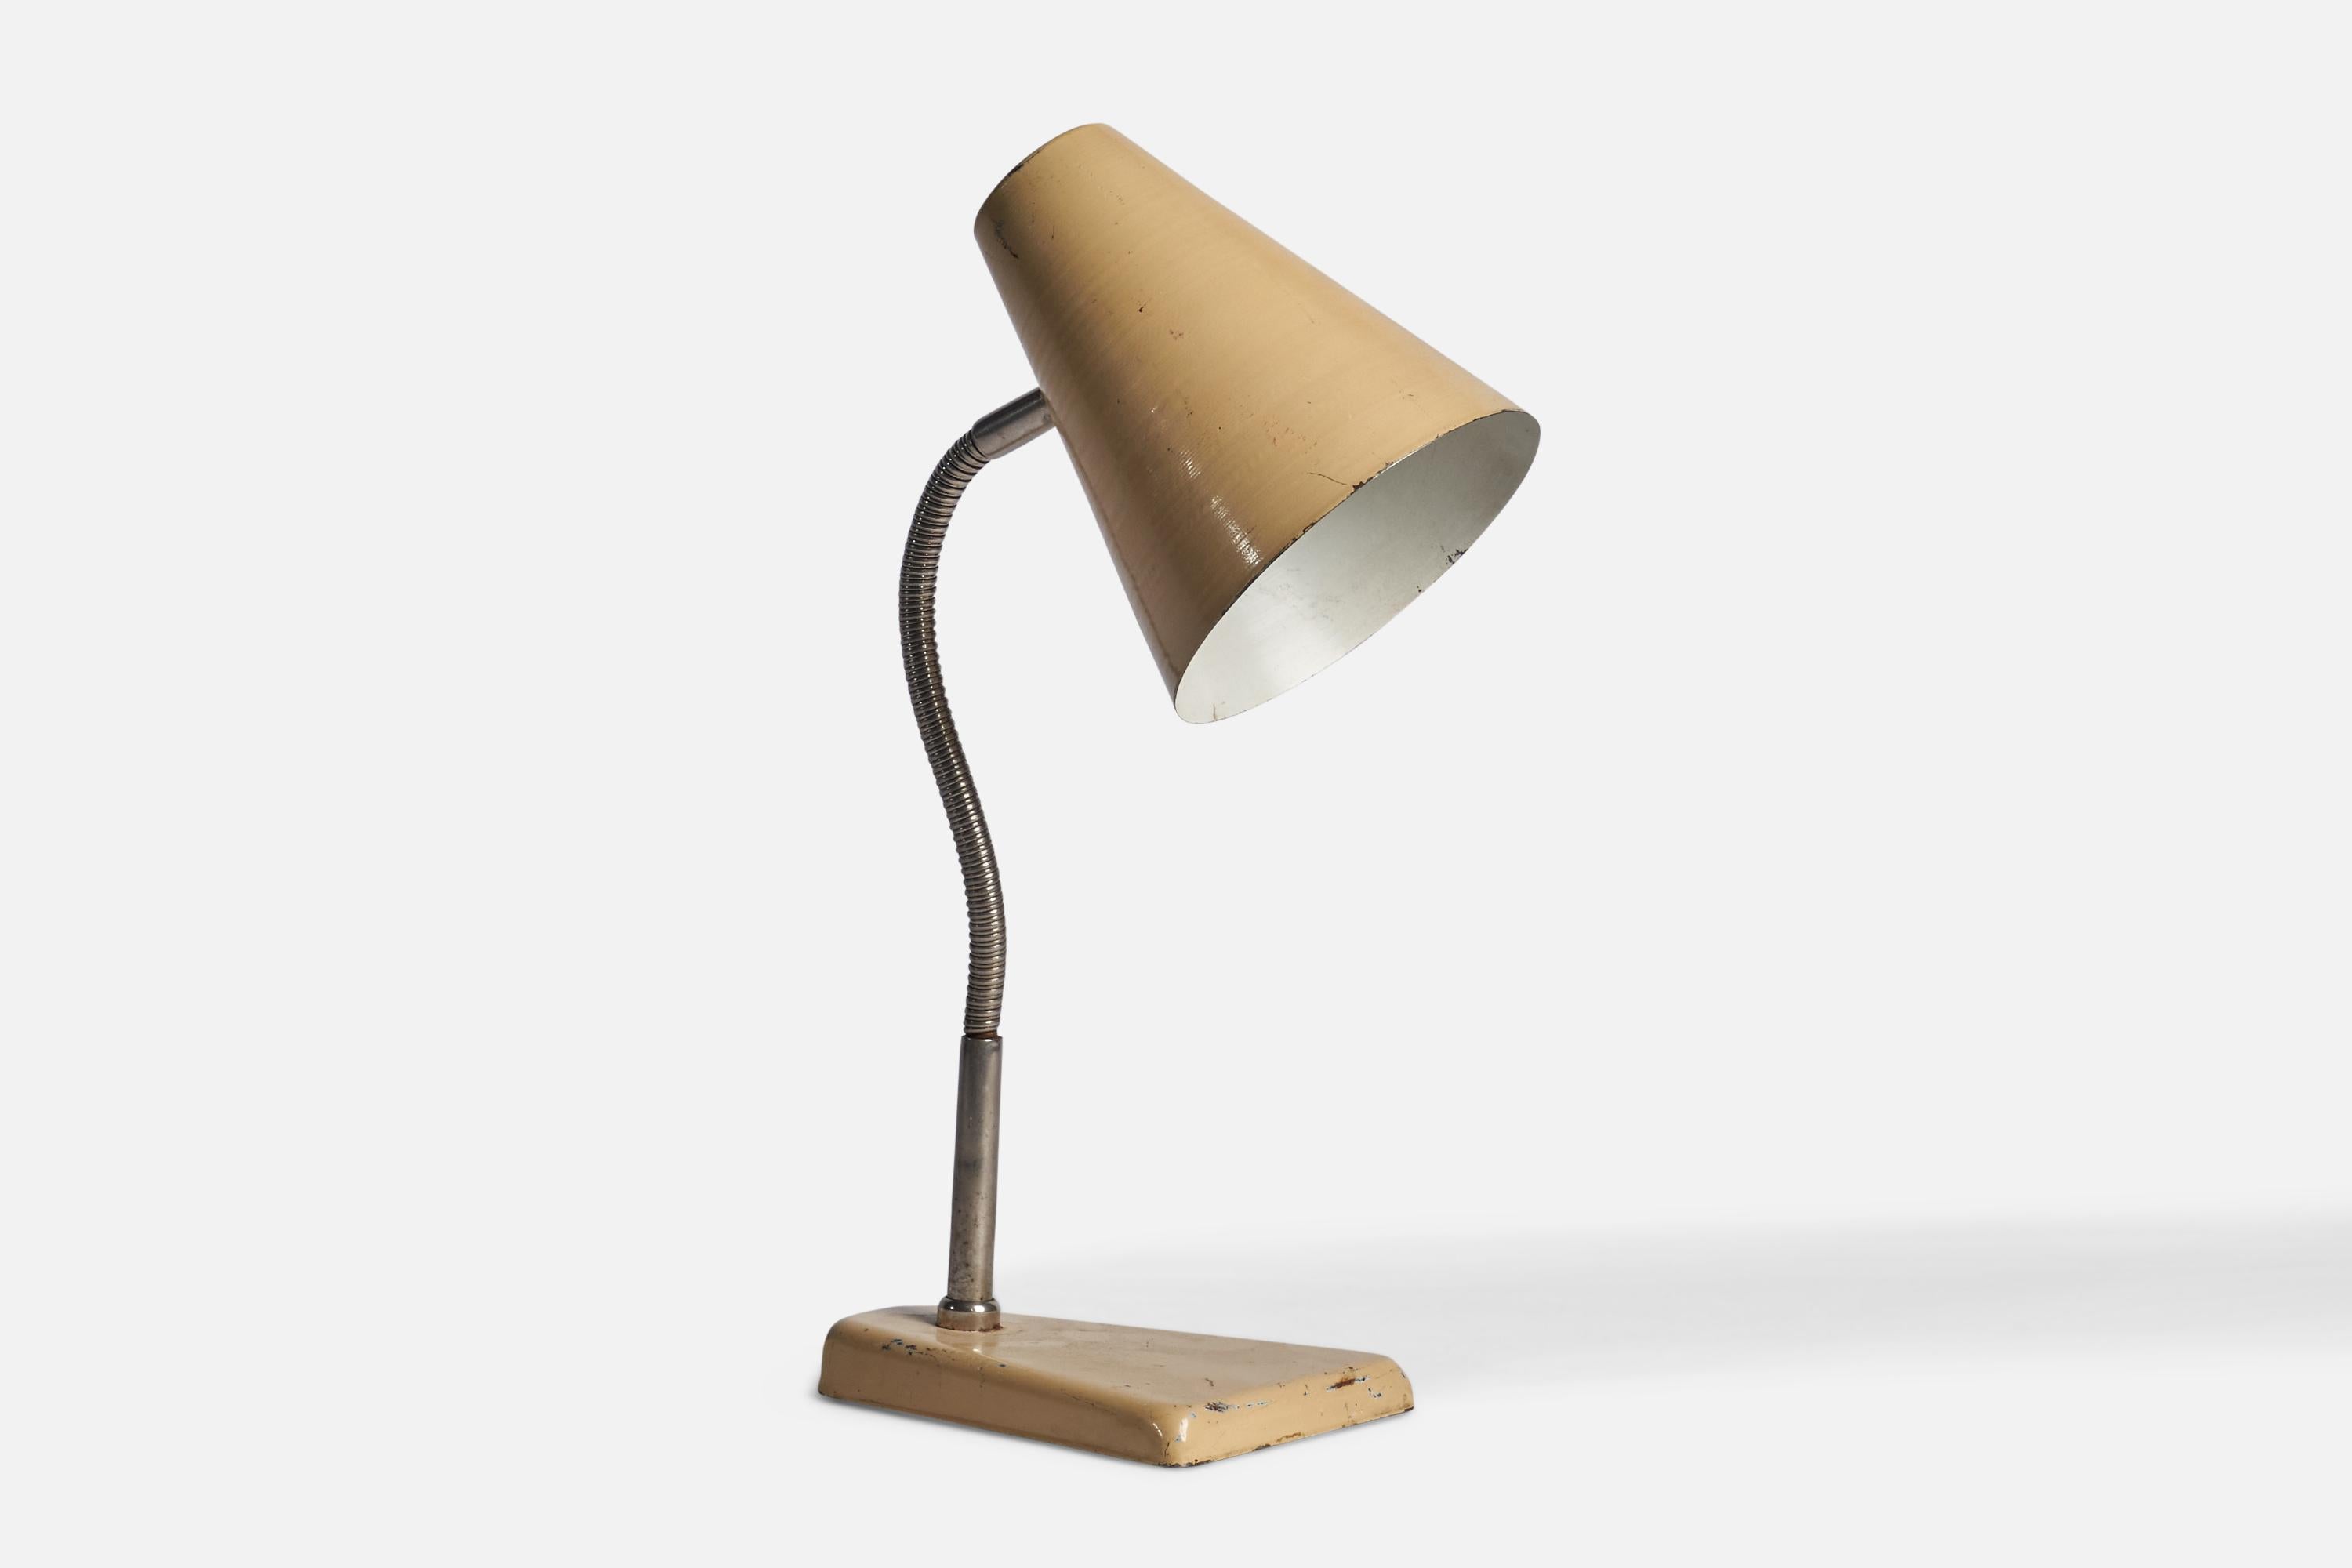 An adjustable chrome and beige-lacquered aluminium table lamp designed and produced in Denmark, 1930s.

Overall Dimensions (inches): 17.5” H x 5.80” W x 9” D
Dimensions variable based on position of light.
Bulb Specifications: E-26 Bulb
Number of